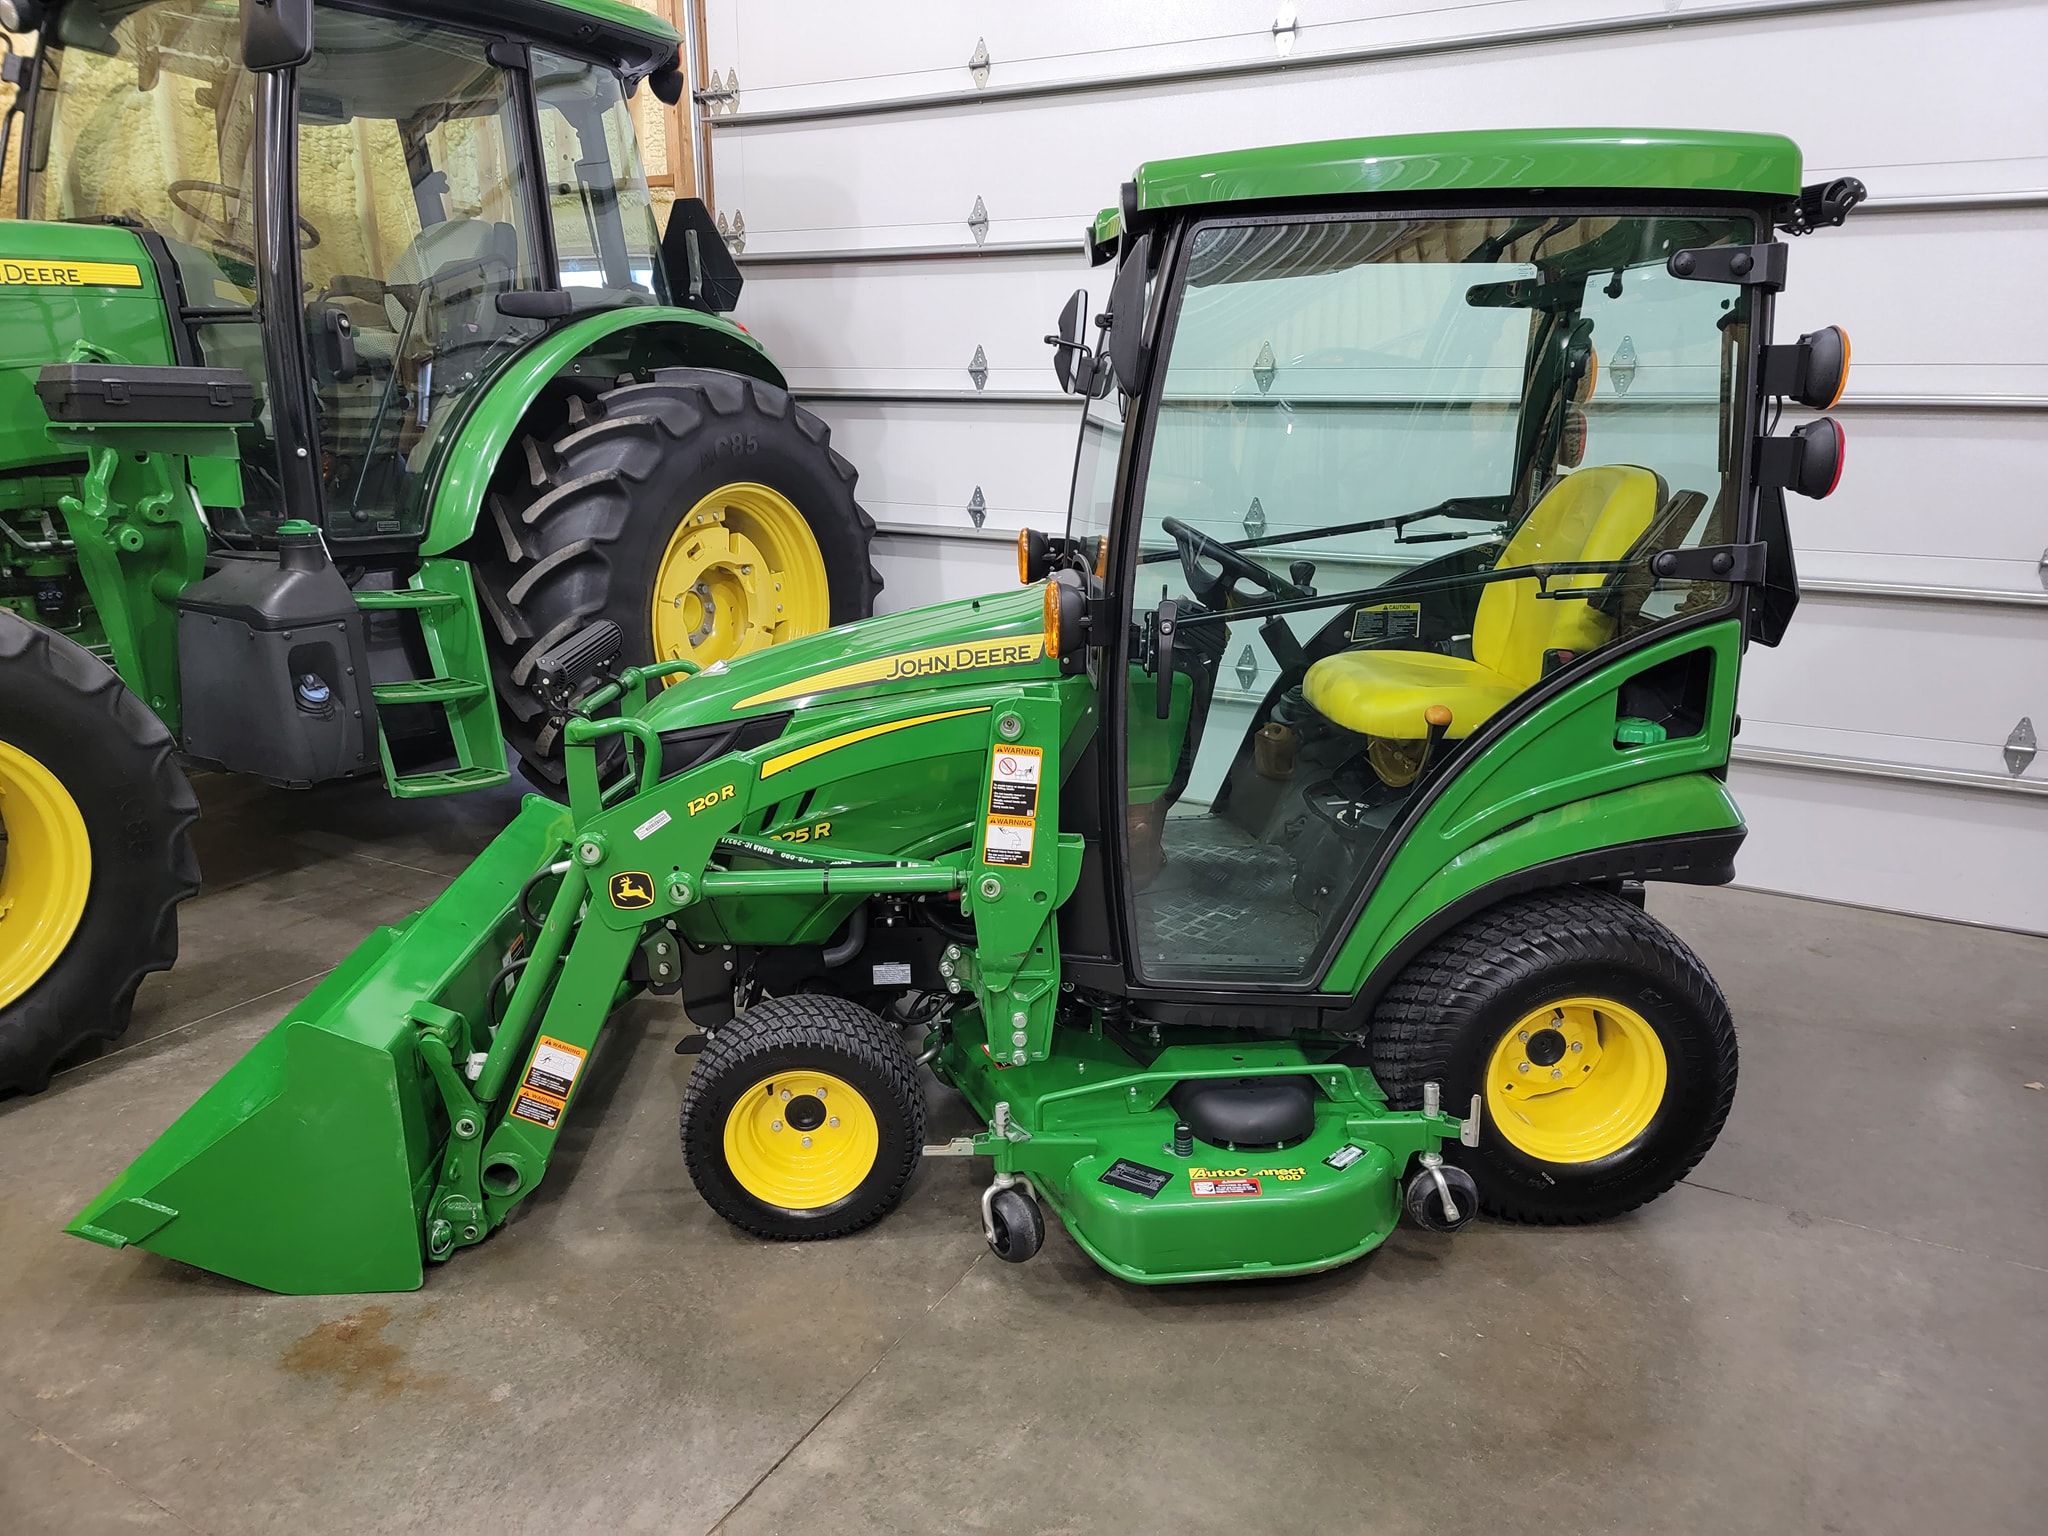 LIKE NEW LOW HOUR John Deere 1025R Sub Compact Tractor, Loader, Mower